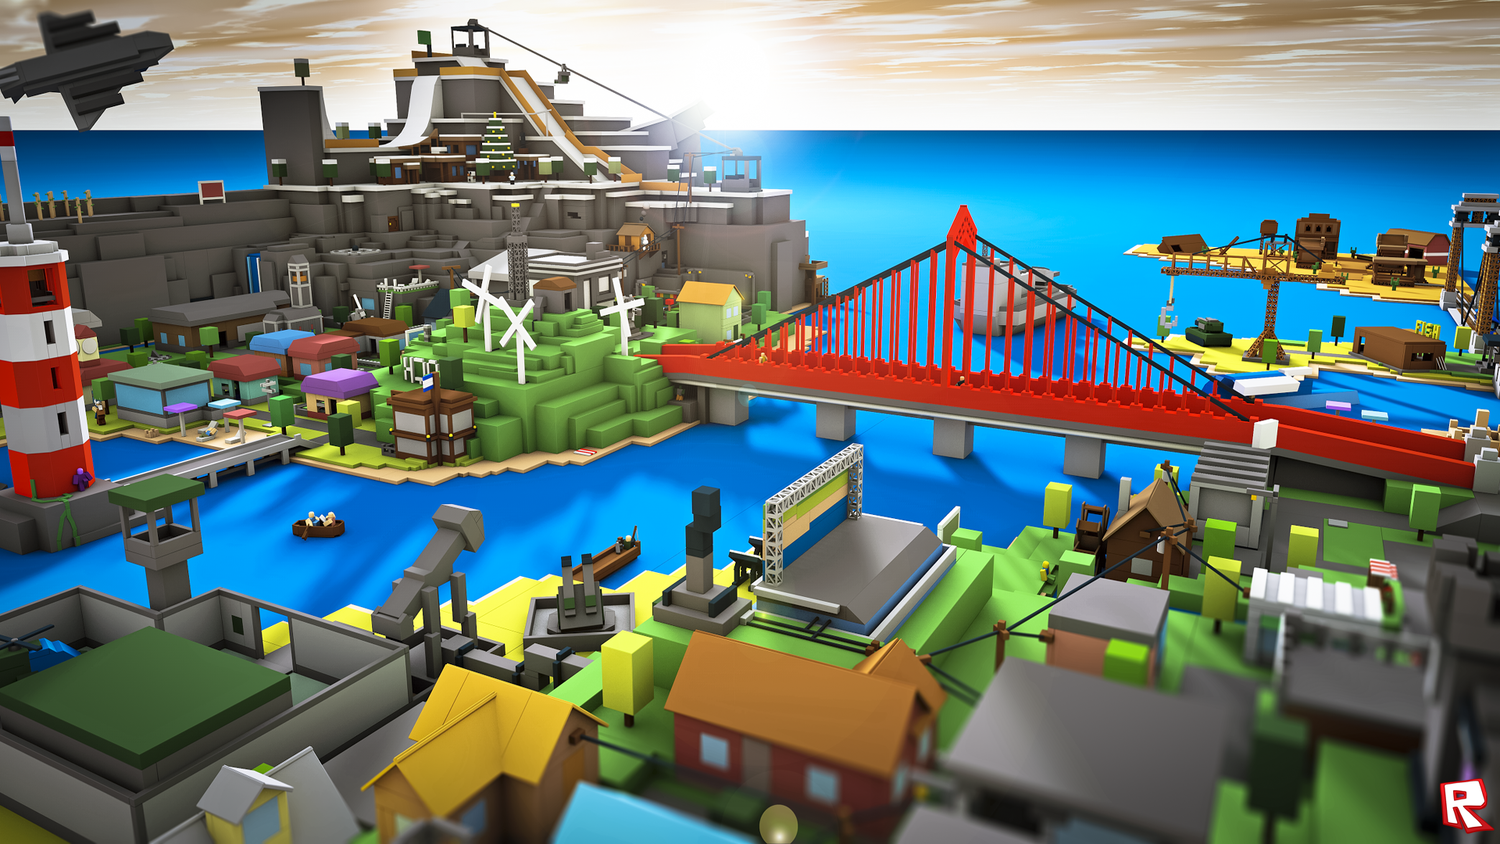 Roblox Adds Ability To Develop And Upload Games To Xbox One